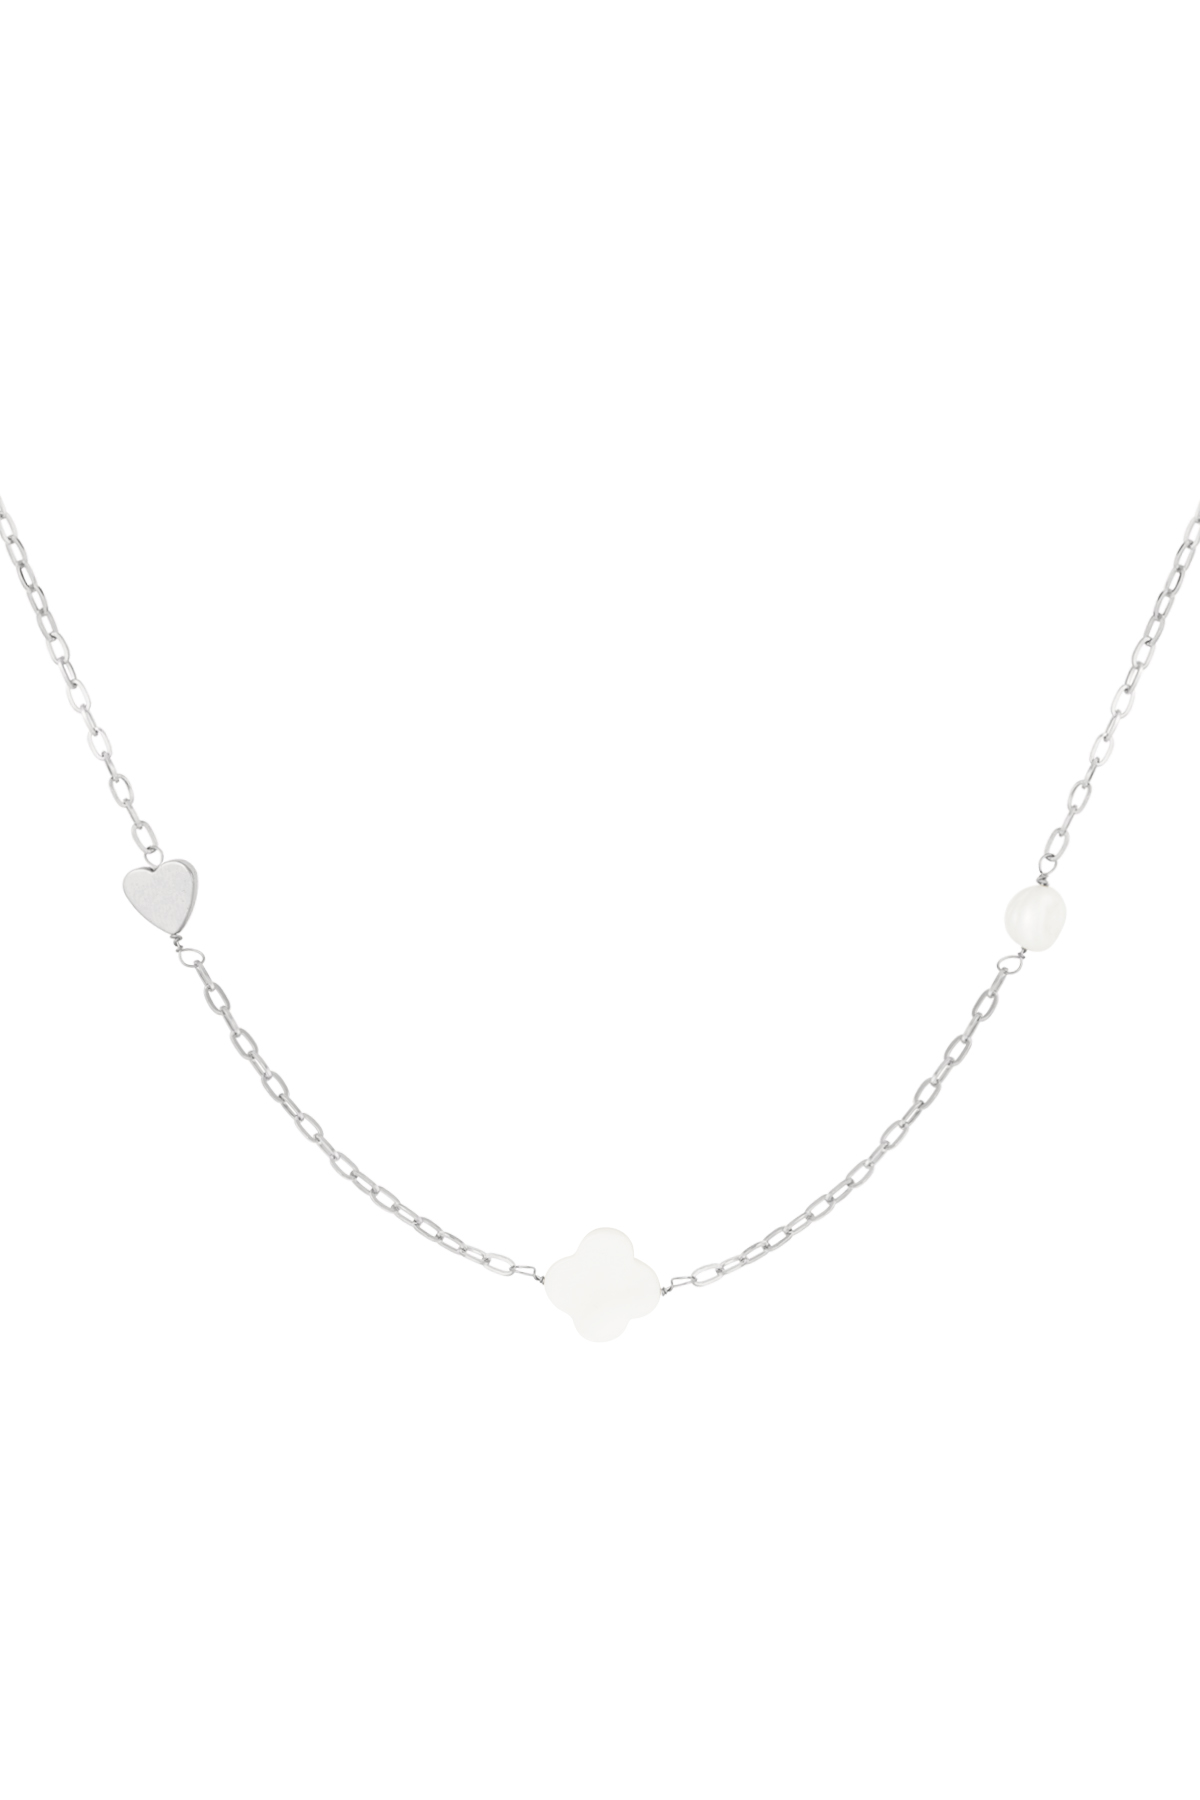 Necklace heart clover shell - silver h5 